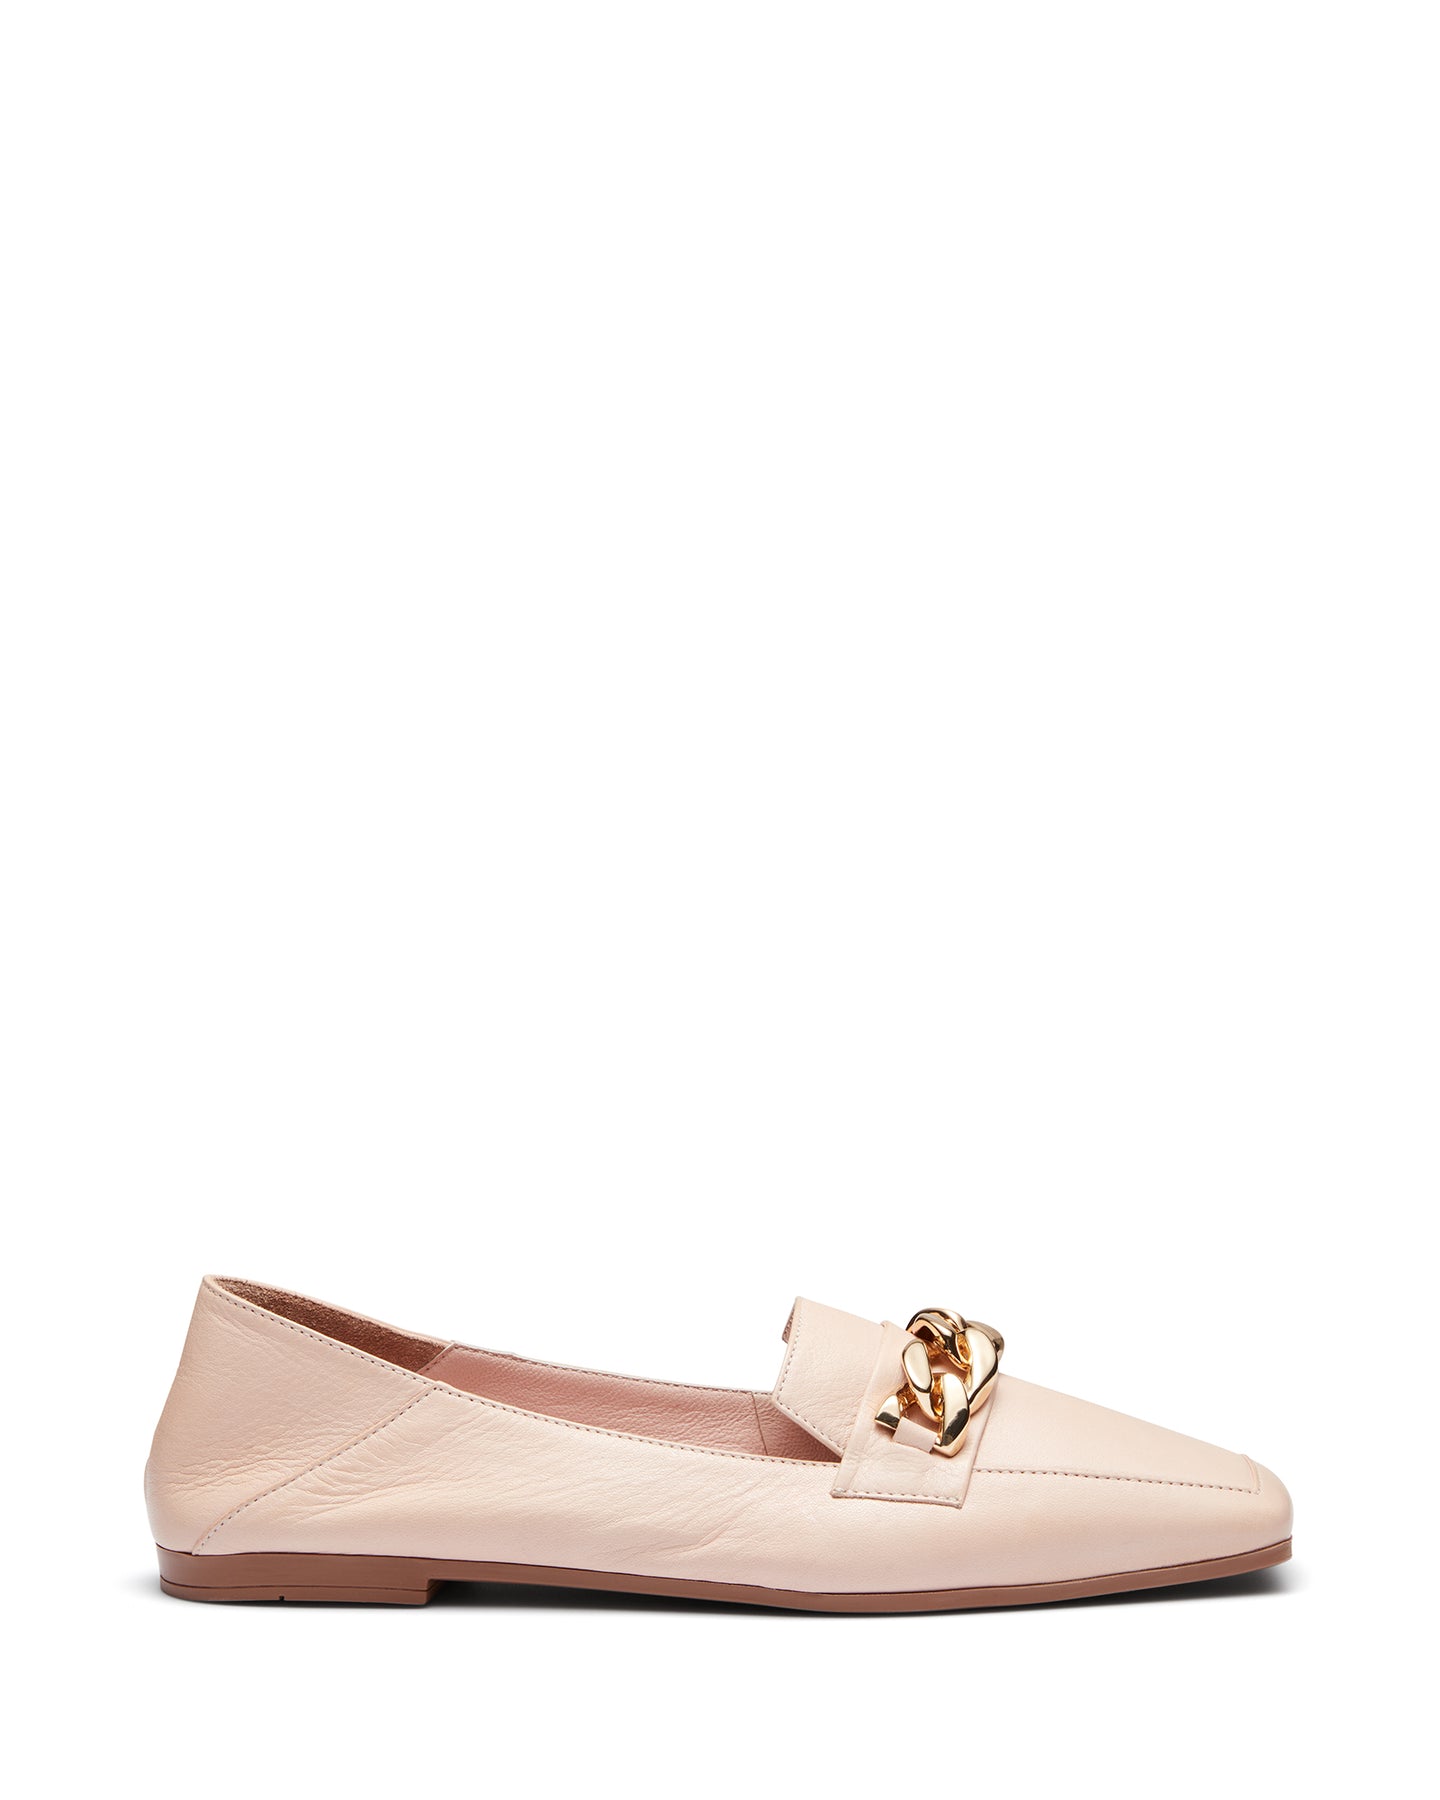 Just Because Shoes Britt Cream | Leather Loafers | Flats | Slip On | Chain